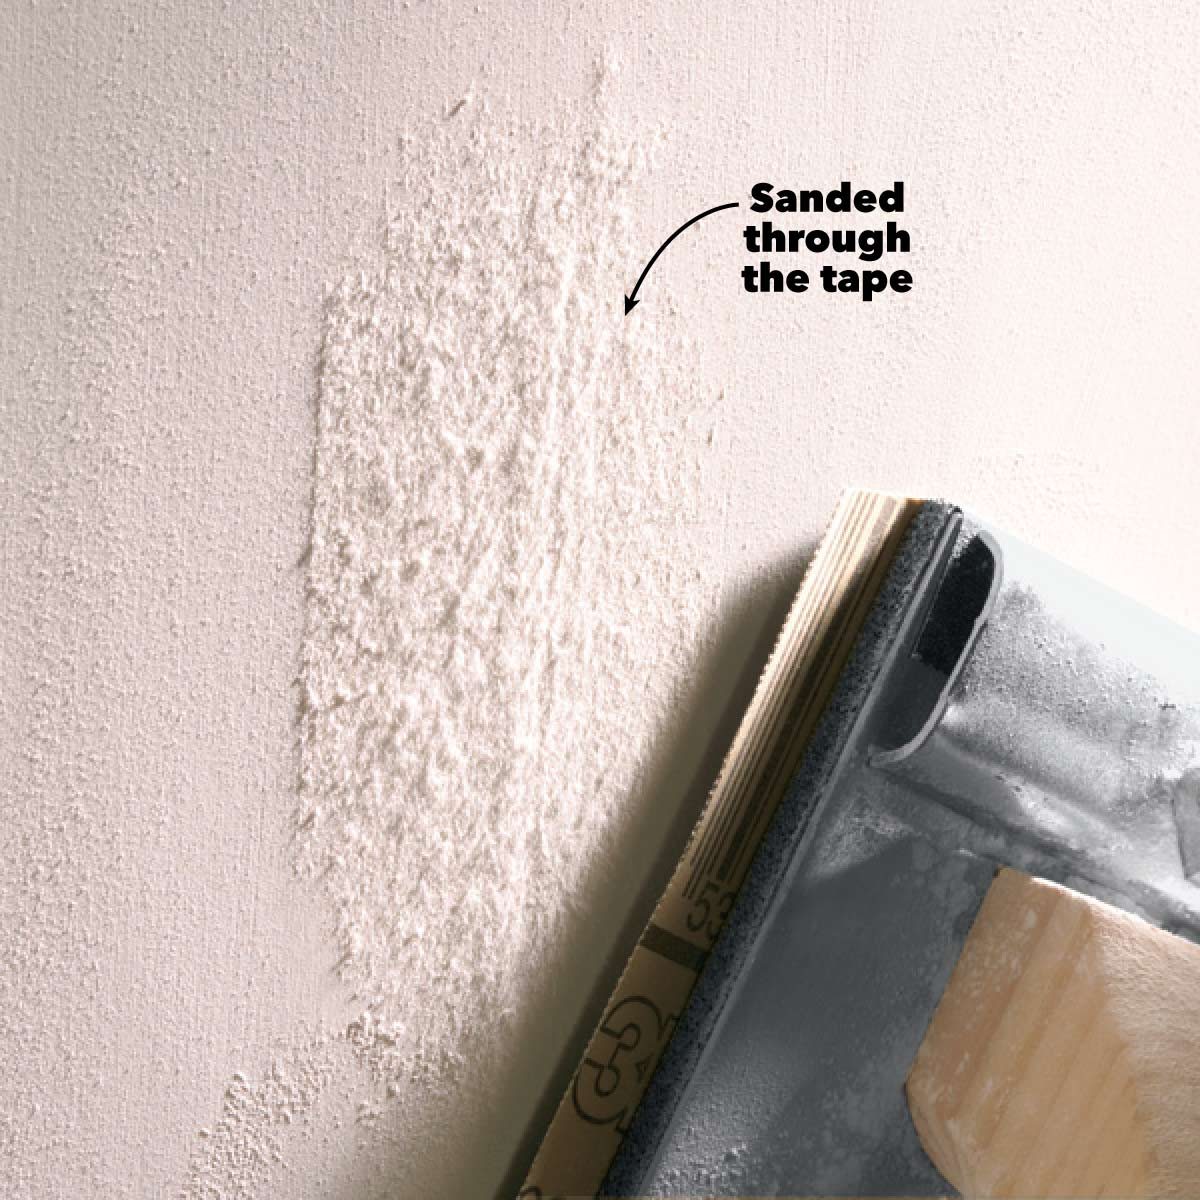 Drywall Sanding Tips and Techniques 